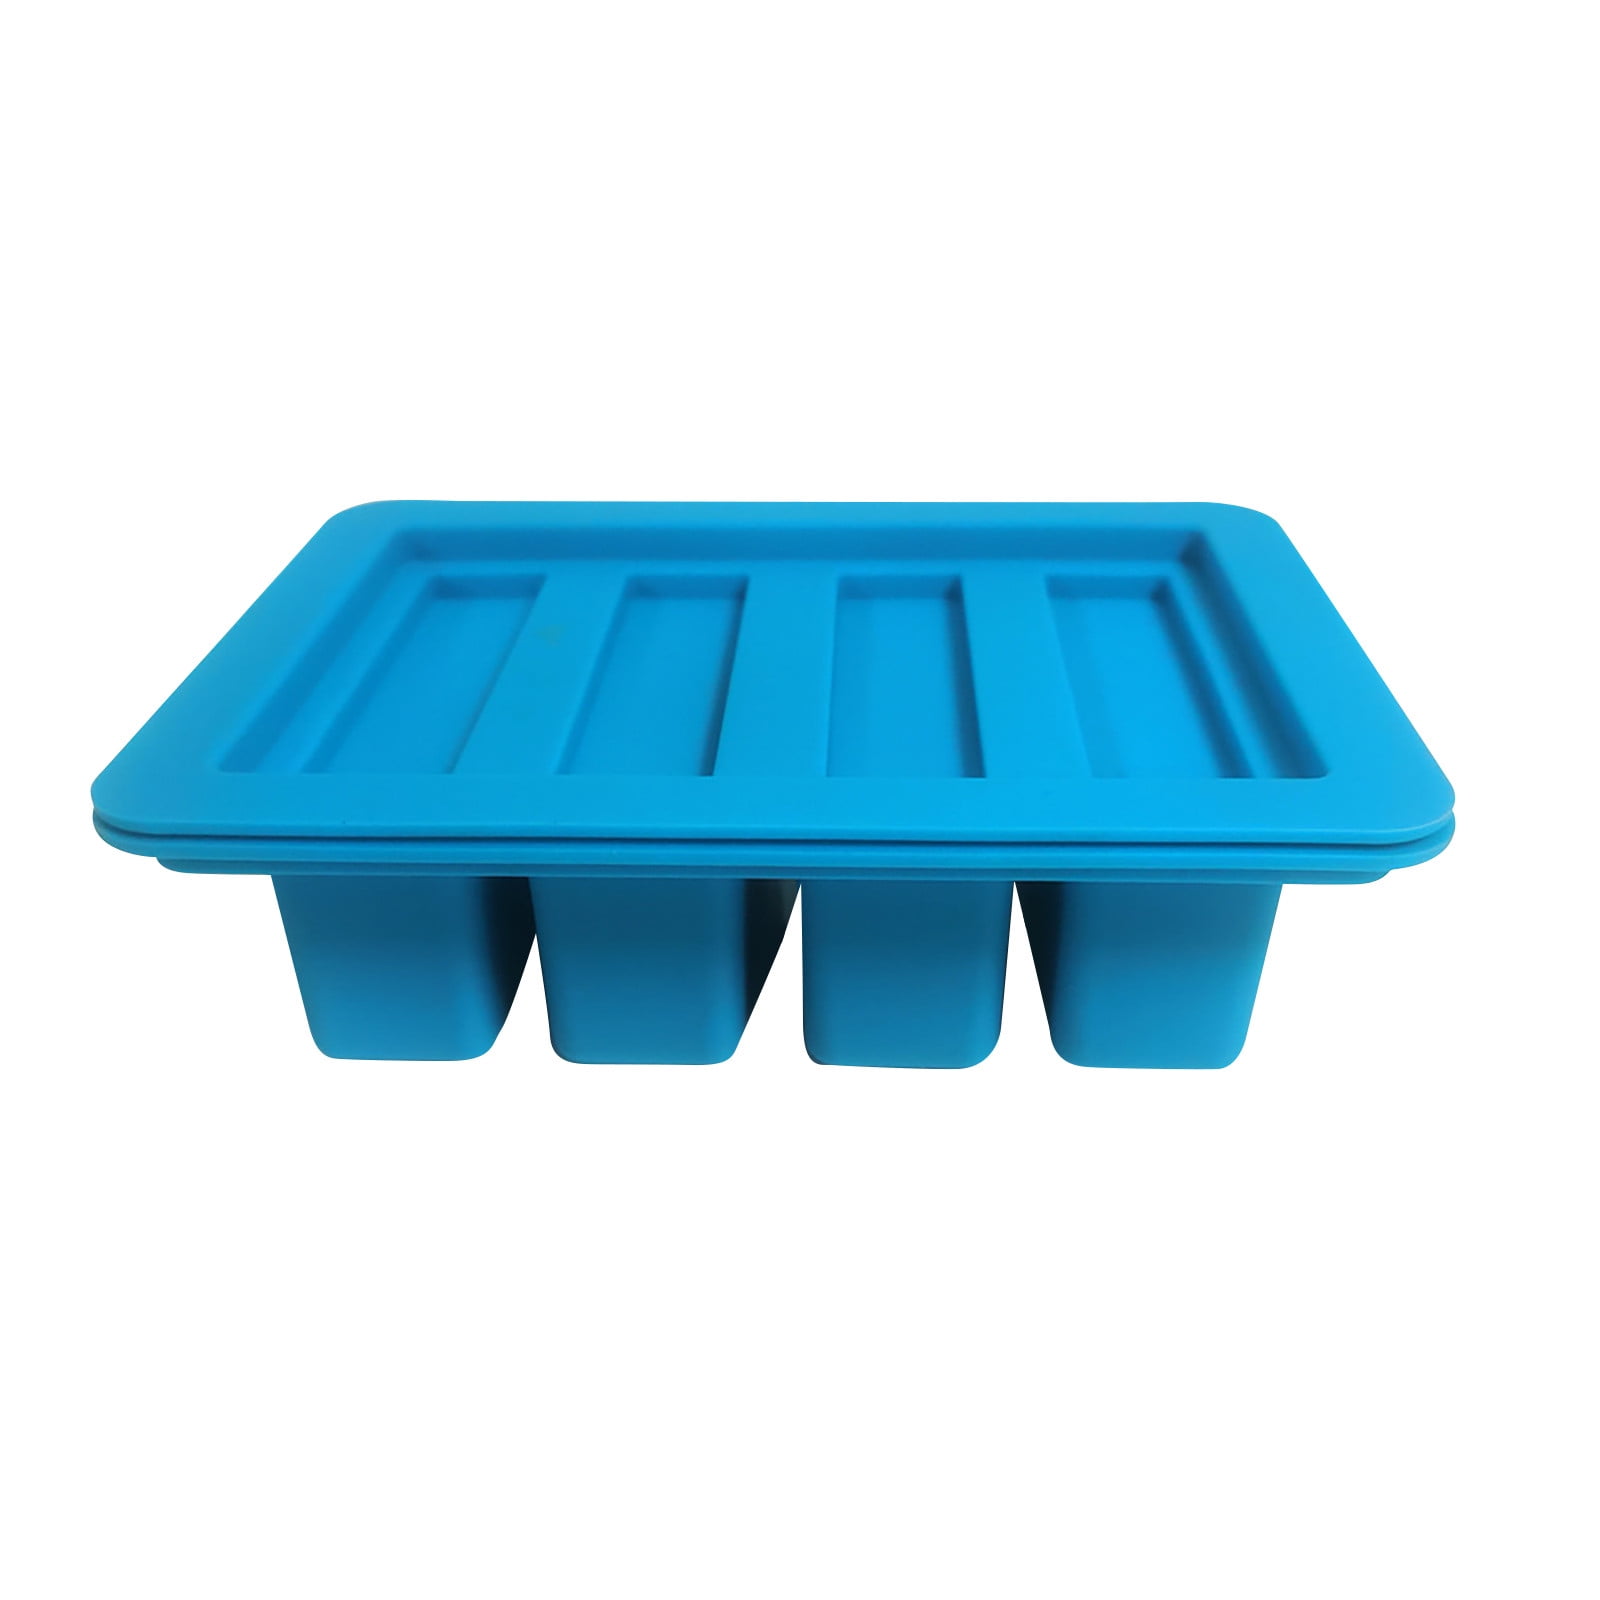 Silicone Butter Mold Tray w/Lid by HOMEVIVA - Non-Stick Cavities Great For  Ice Cube, Soap, Energy Bar, NEW 2021 Blue Green Tie Dye Color